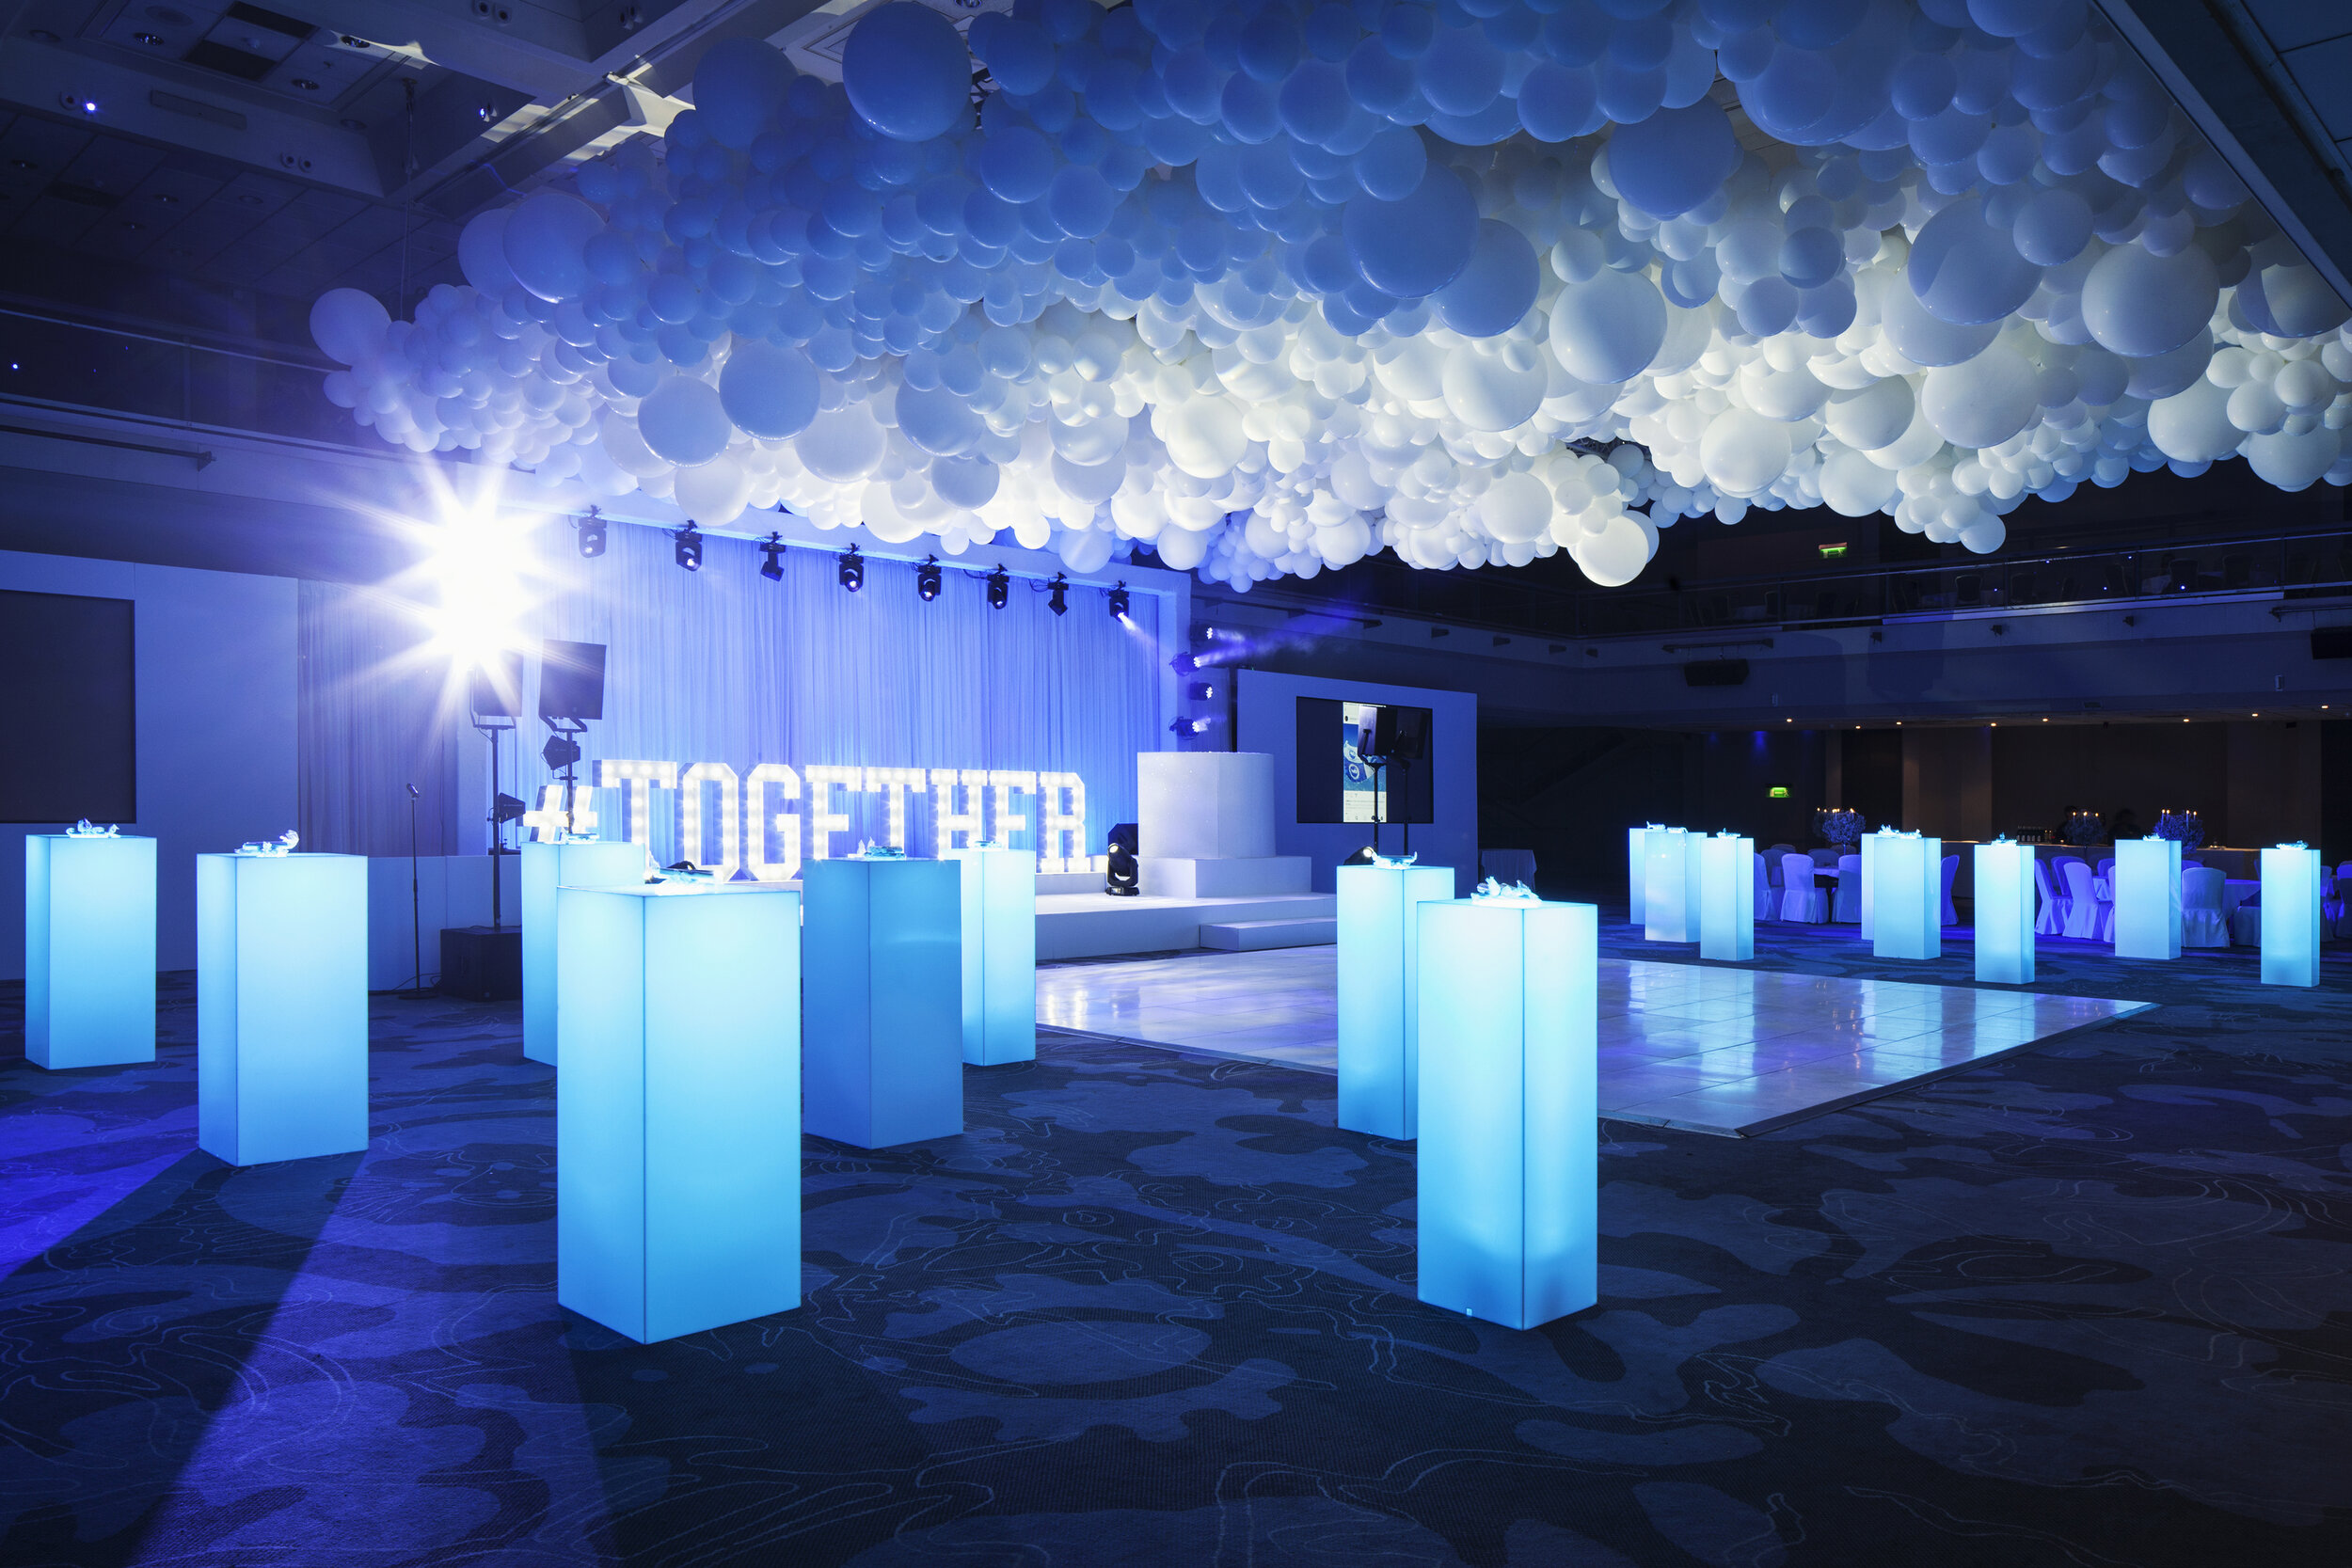 reveries-bhafc-together-premier-league-party-hilton-metropole-staging-drapes-lighting-audio-video-furniture-dancefloor-djbooth-technical-production-o.jpg